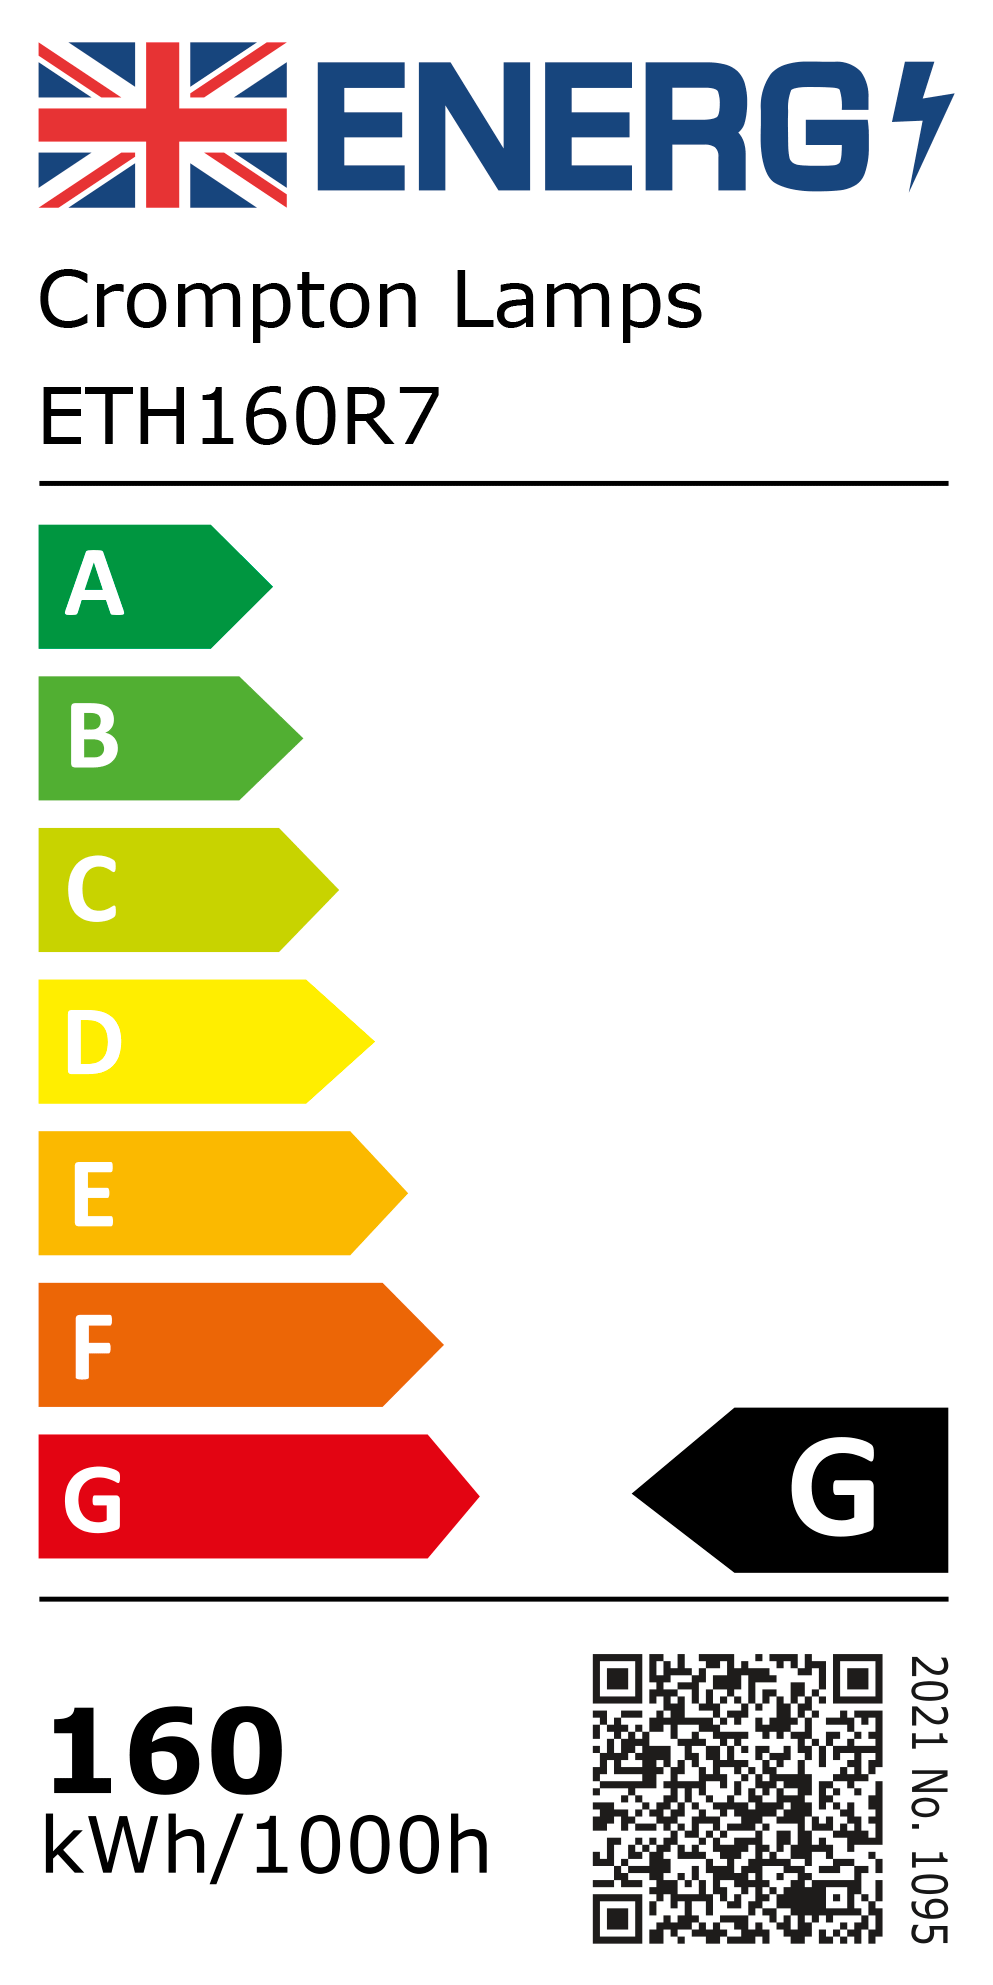 New 2021 Energy Rating Label: Stock Code ETH160R7